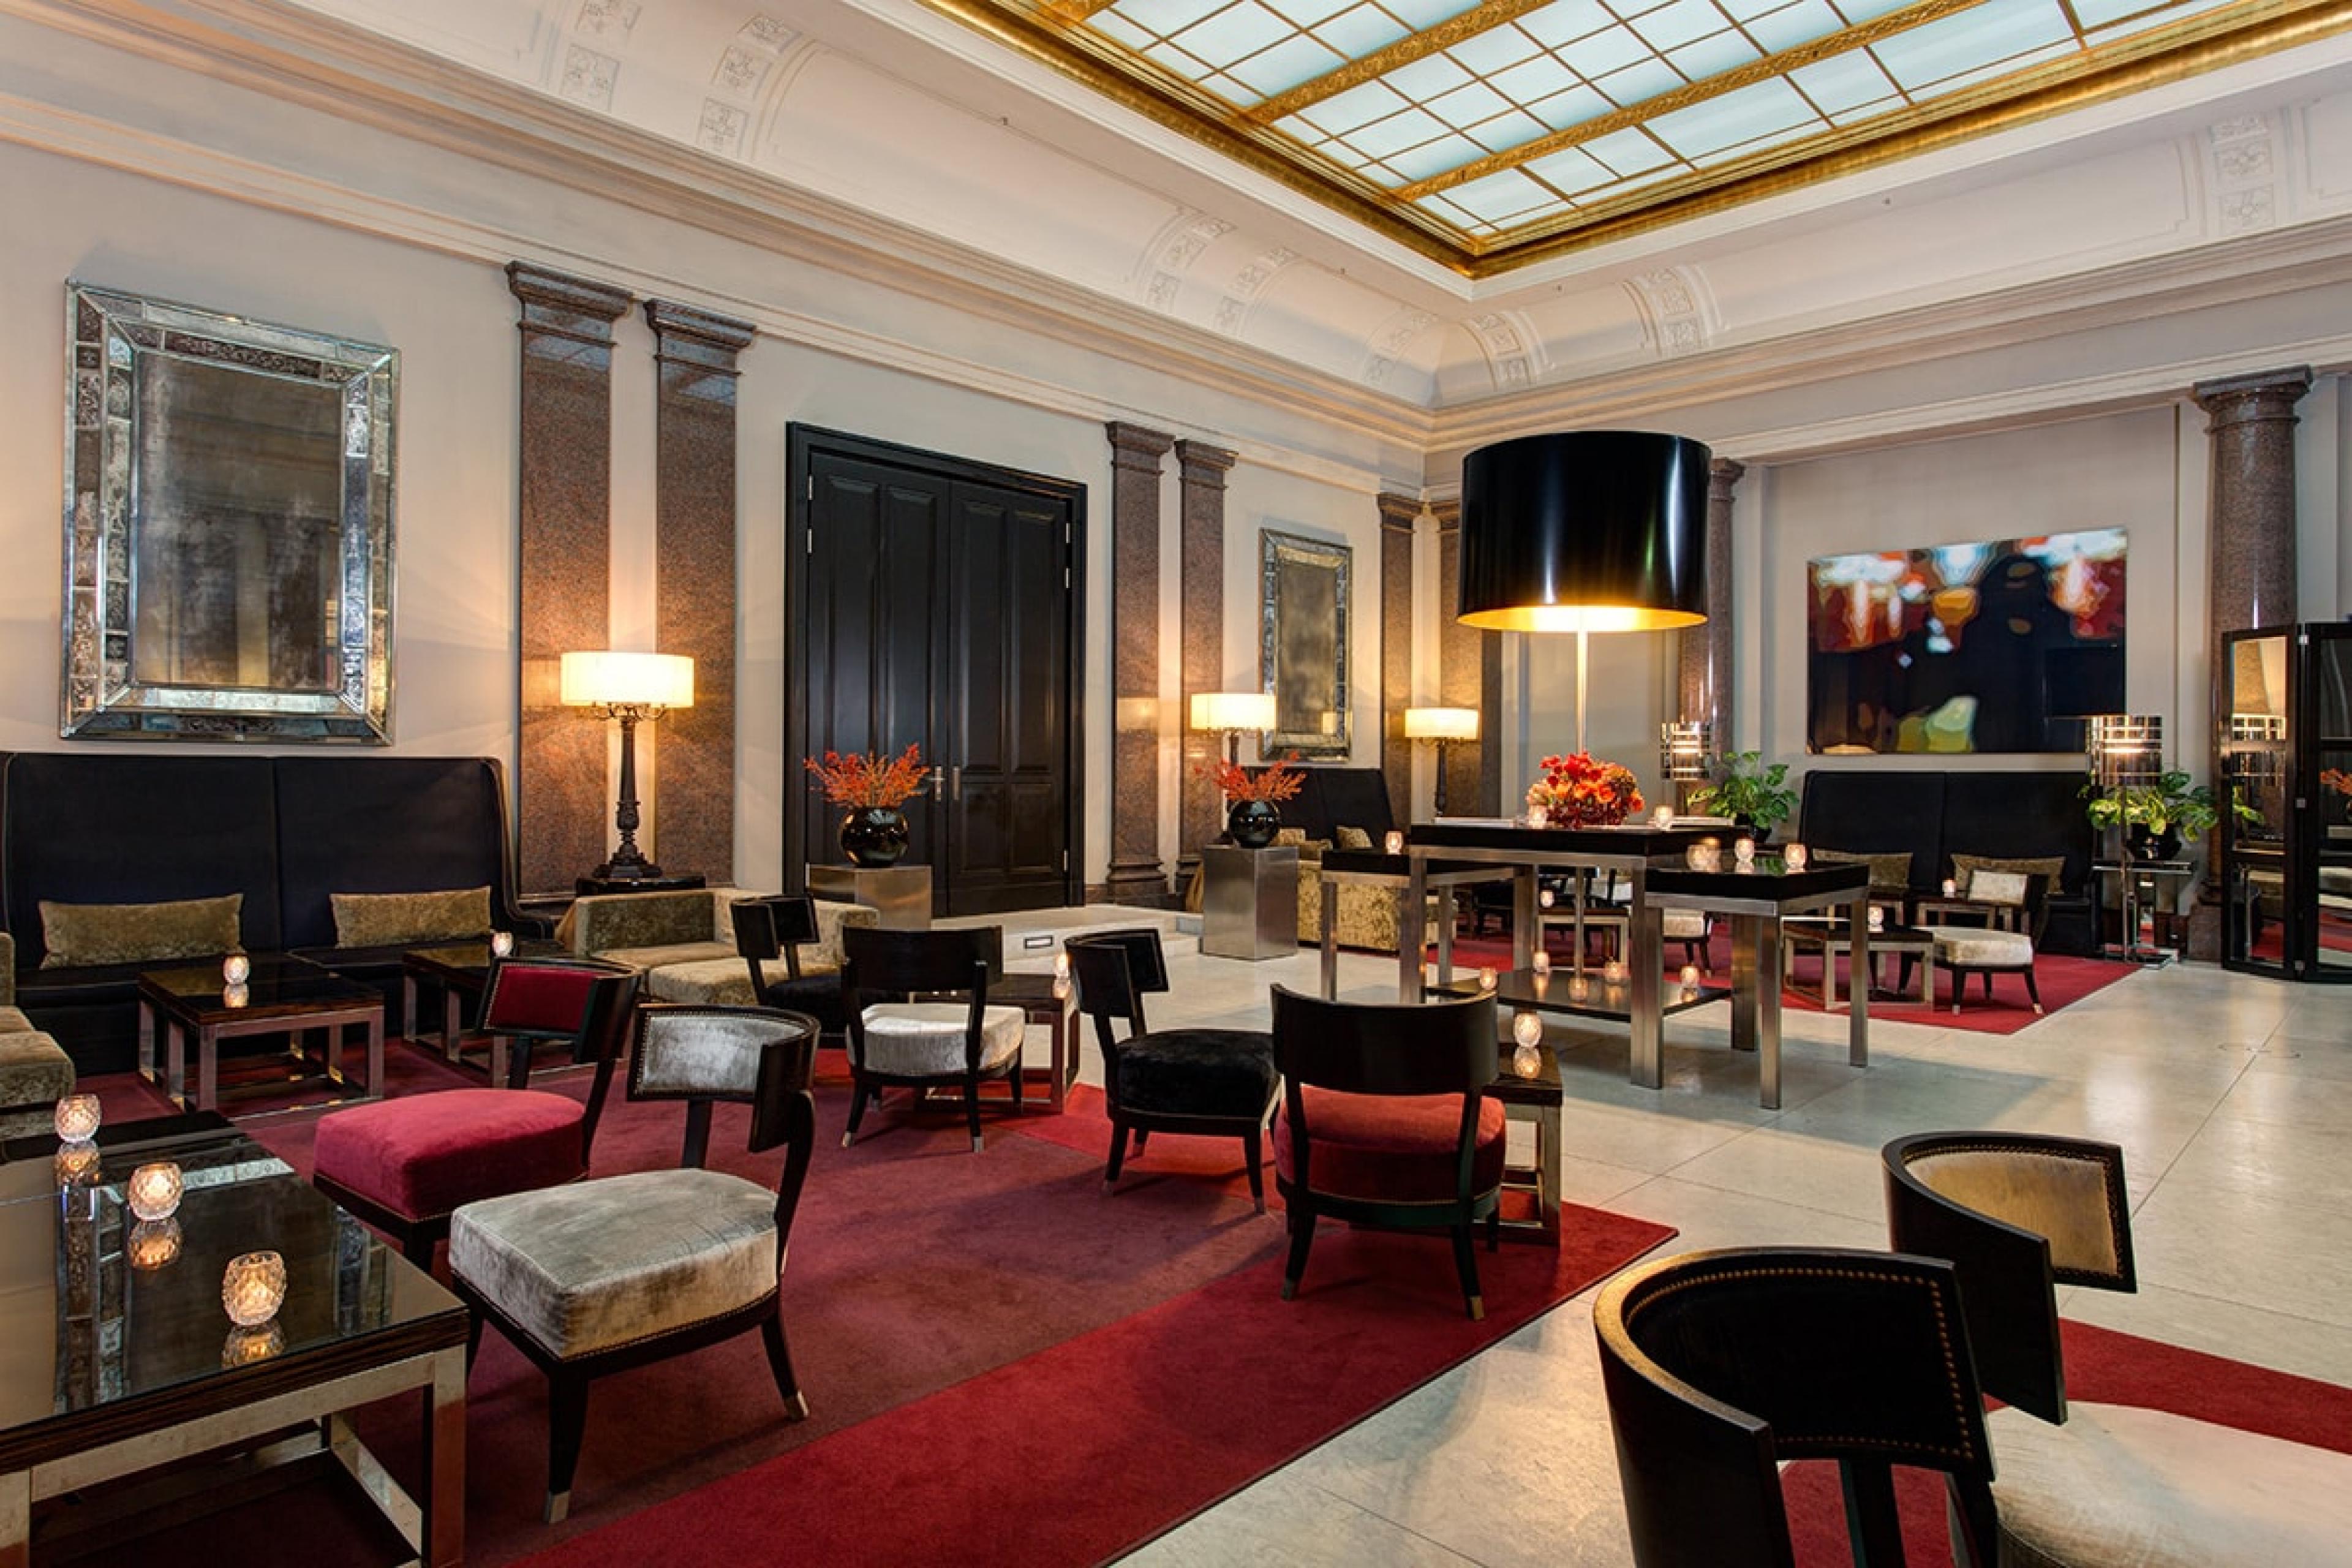 inside hotel lounge with glass skylight ceiling and red carpeting